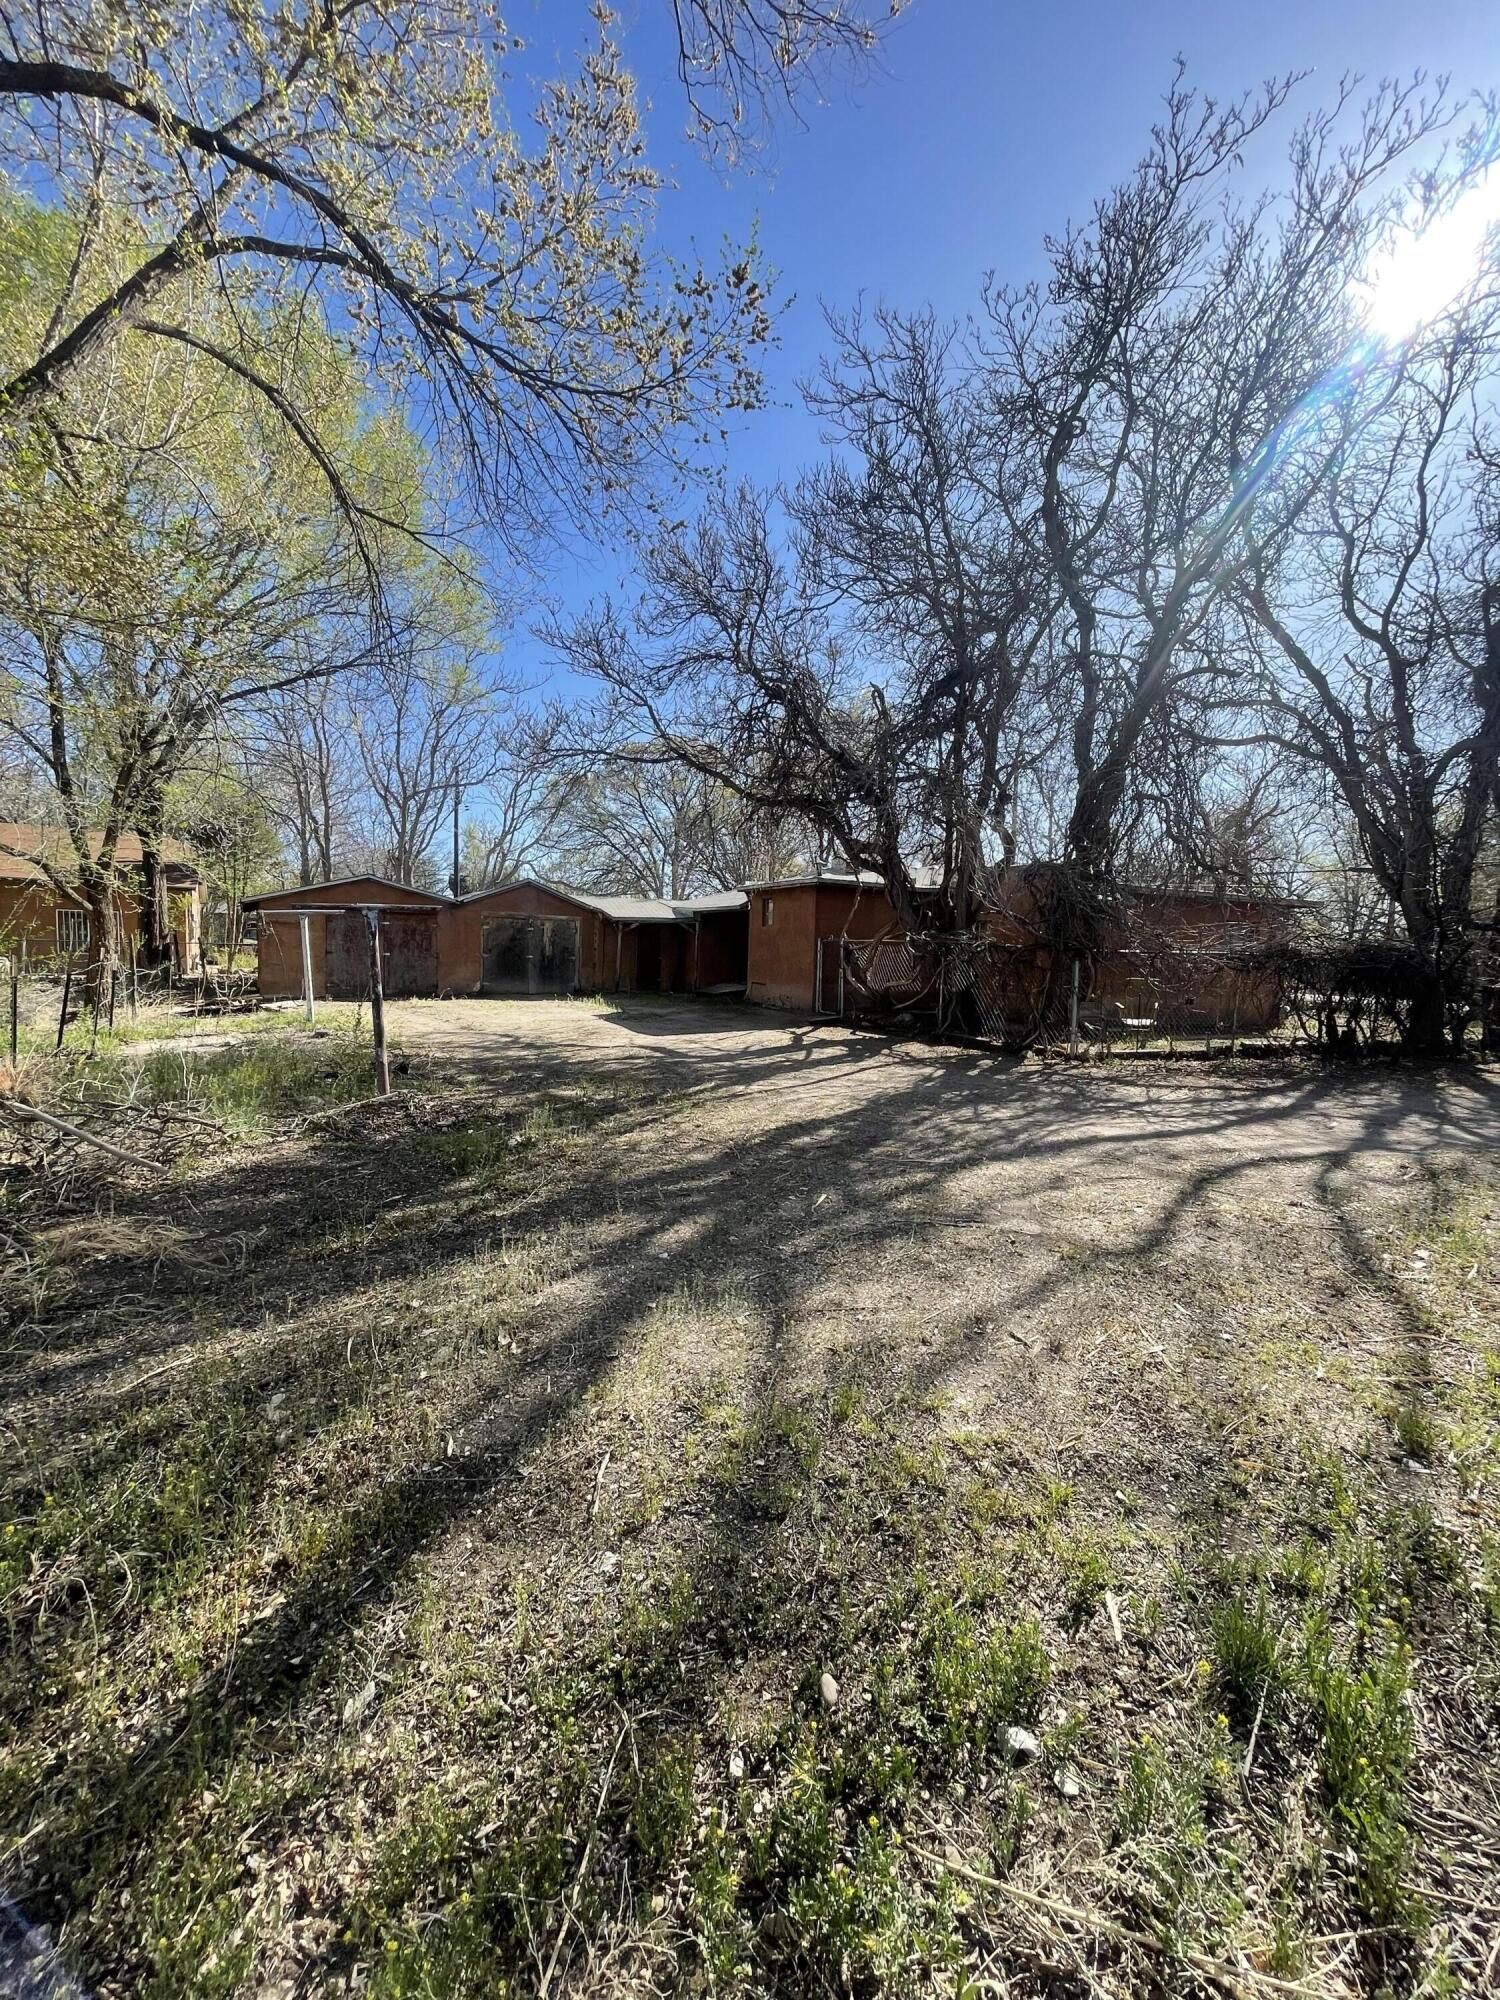 This Priced to sell investment property! Issitting on a huge corner lot! It is a blank canvas with great potential with Backyard Access. Quick drive to down town Albuquerque or I-25.